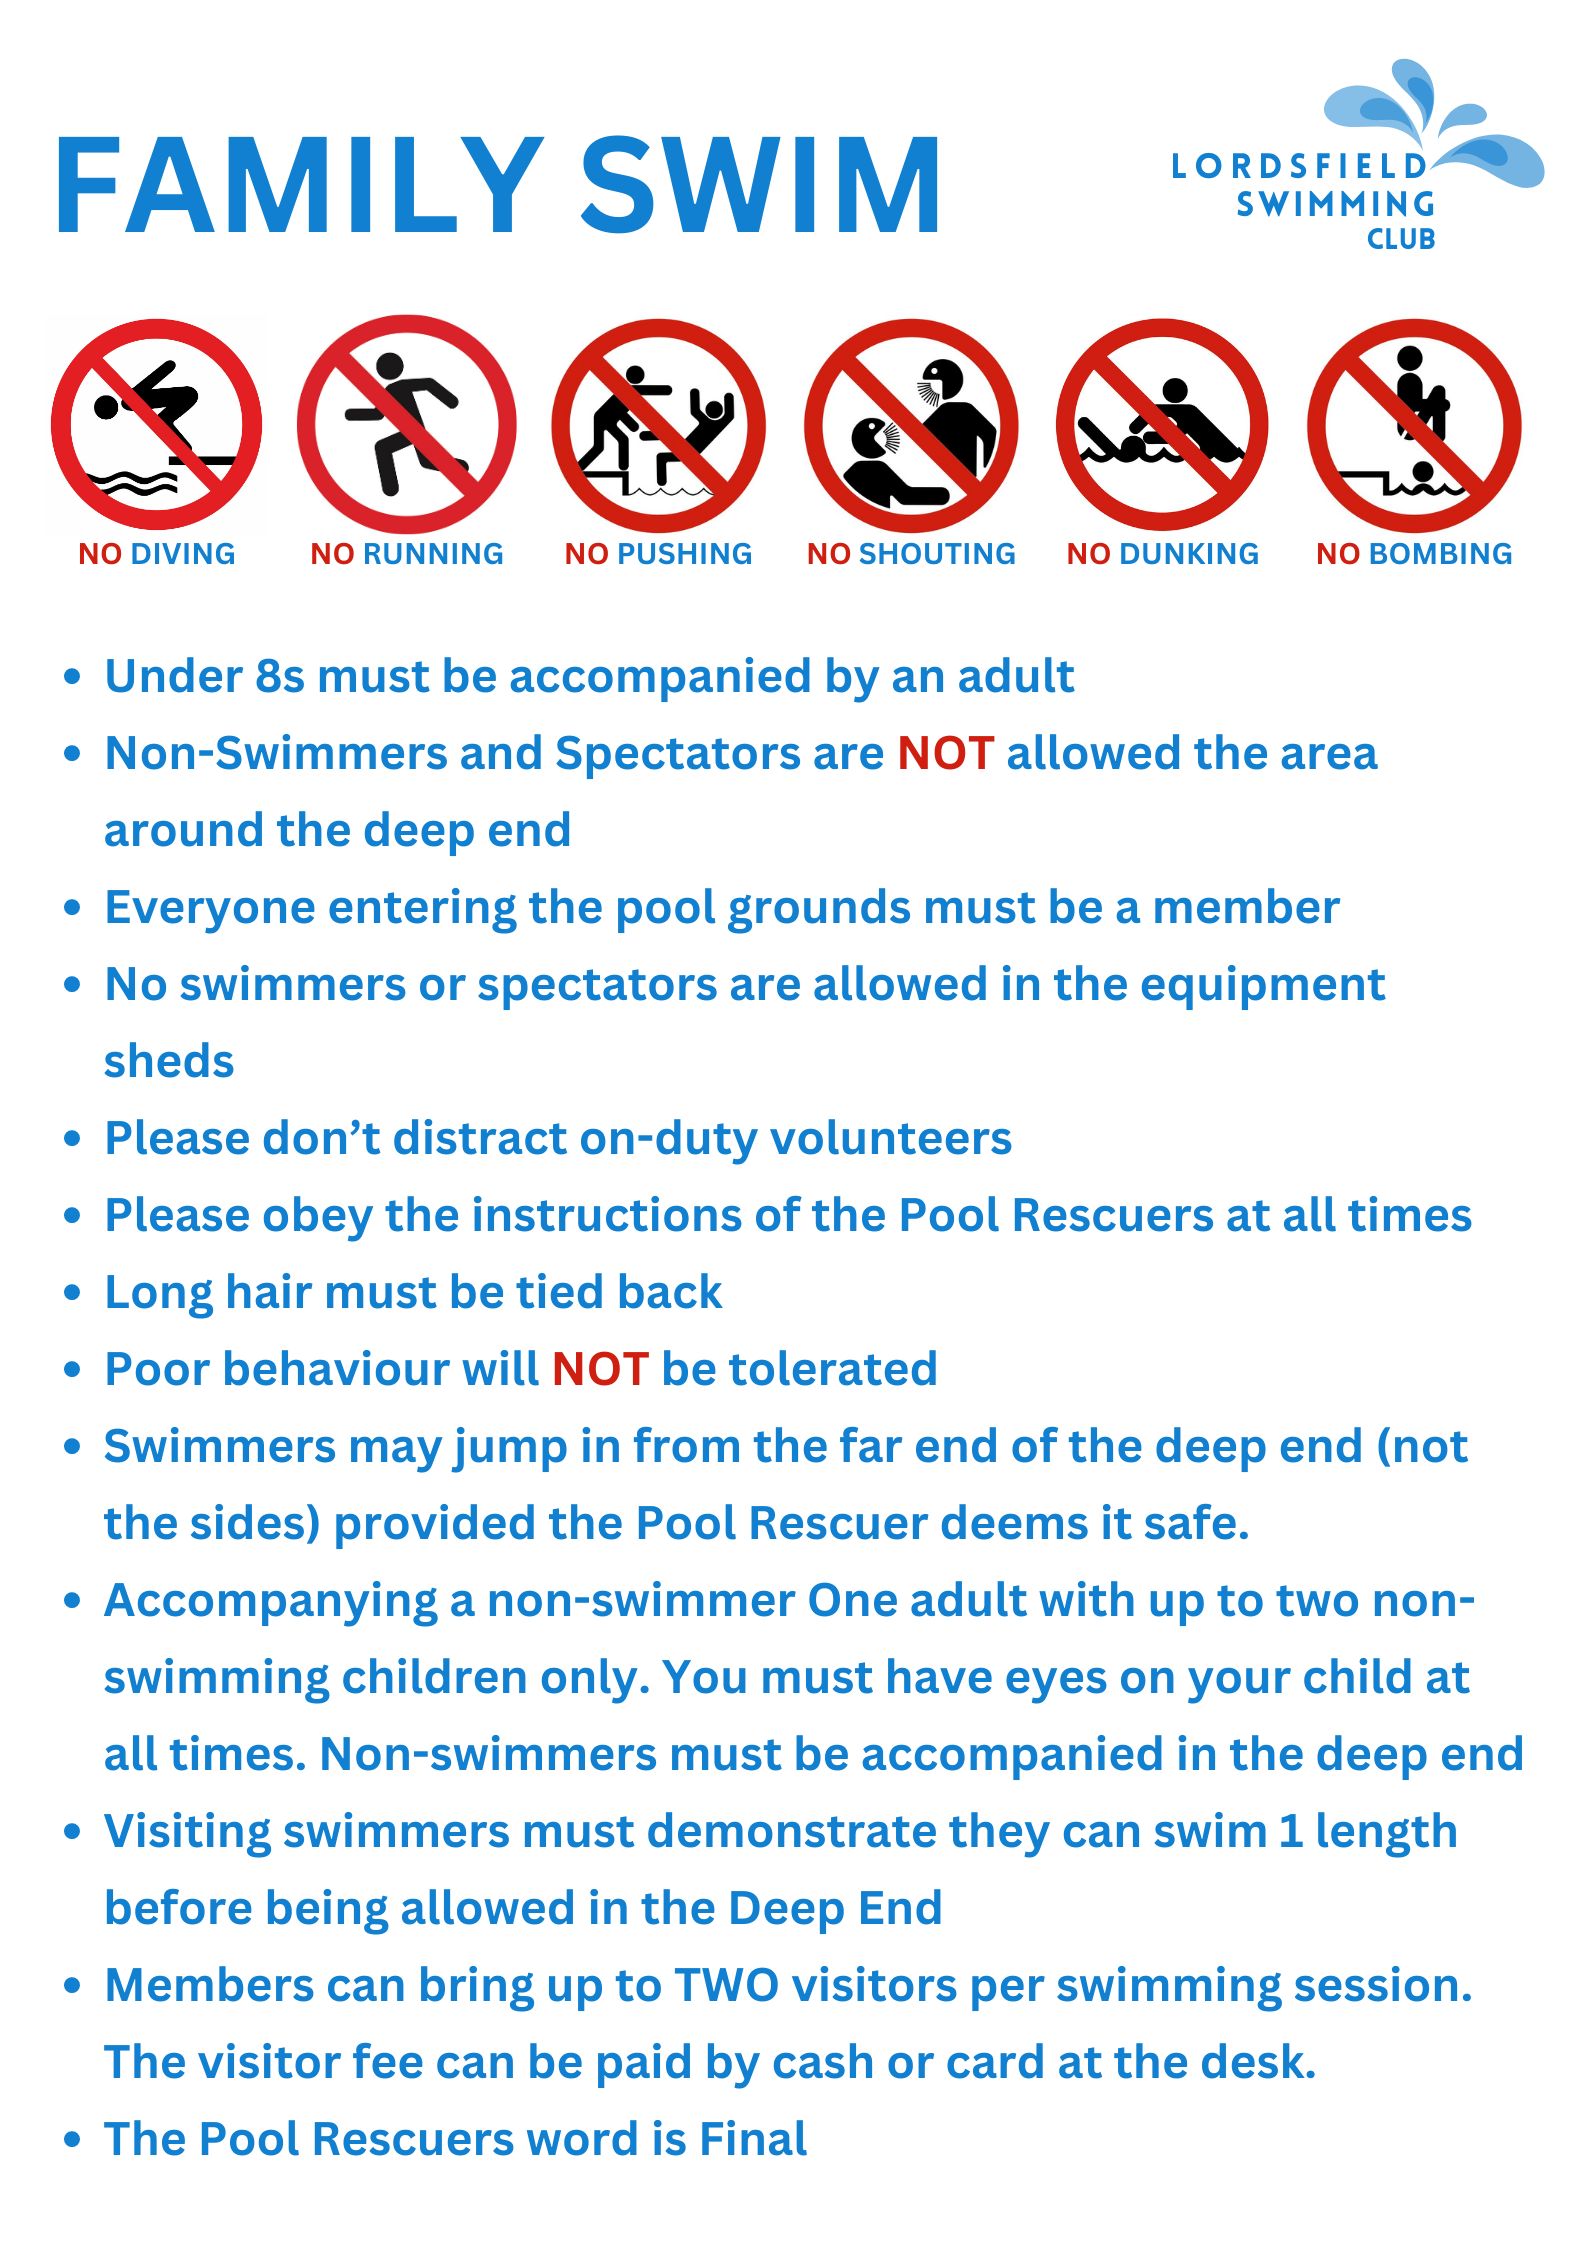 Lordsfield Swimming Club Family Swimming Rules